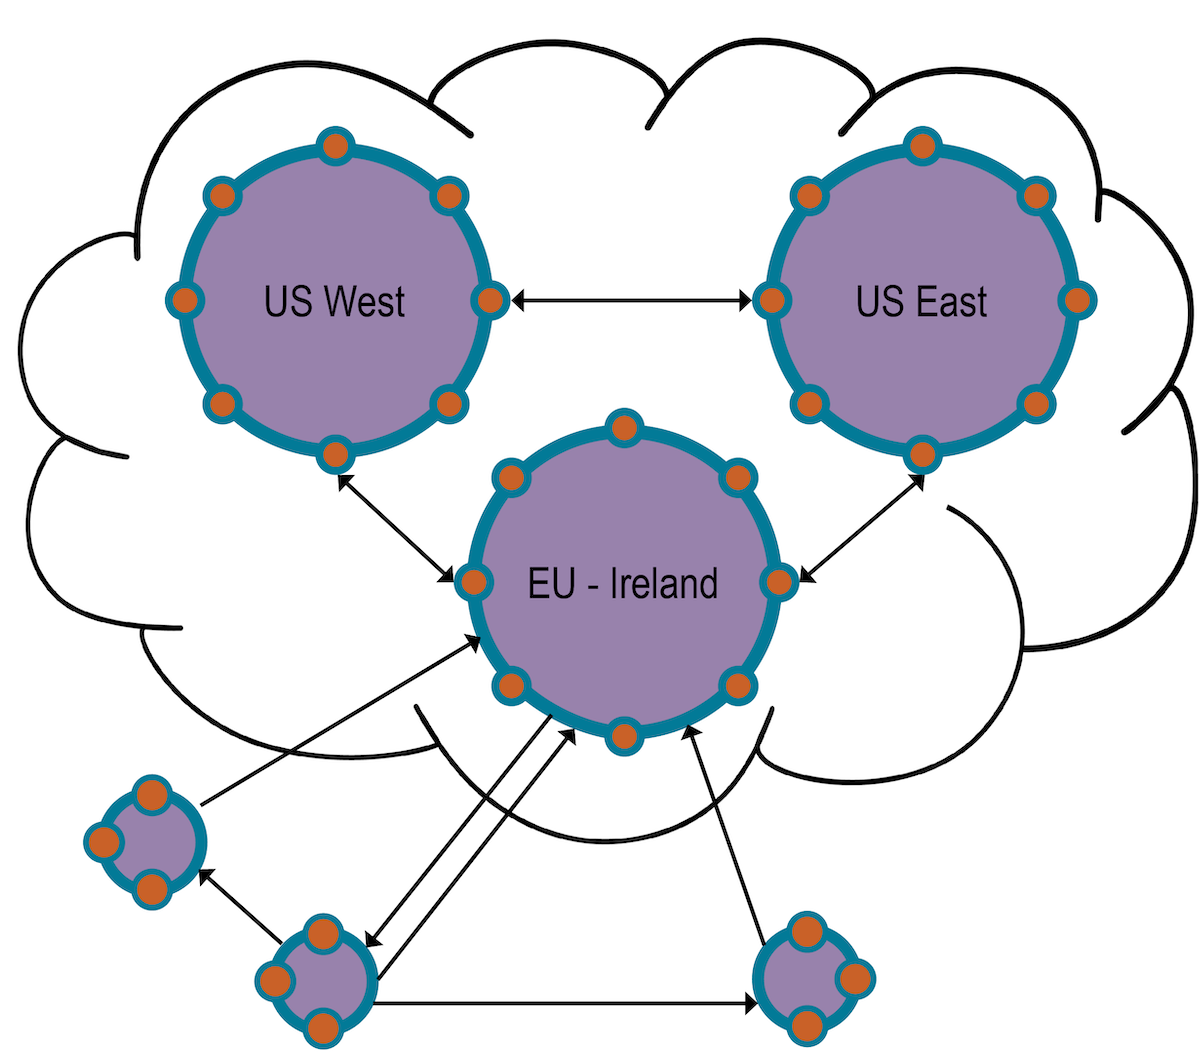 Image showing remote sensors transmitting to a centralized hub cluster, while one remote sensor also transmits to other remote sensors